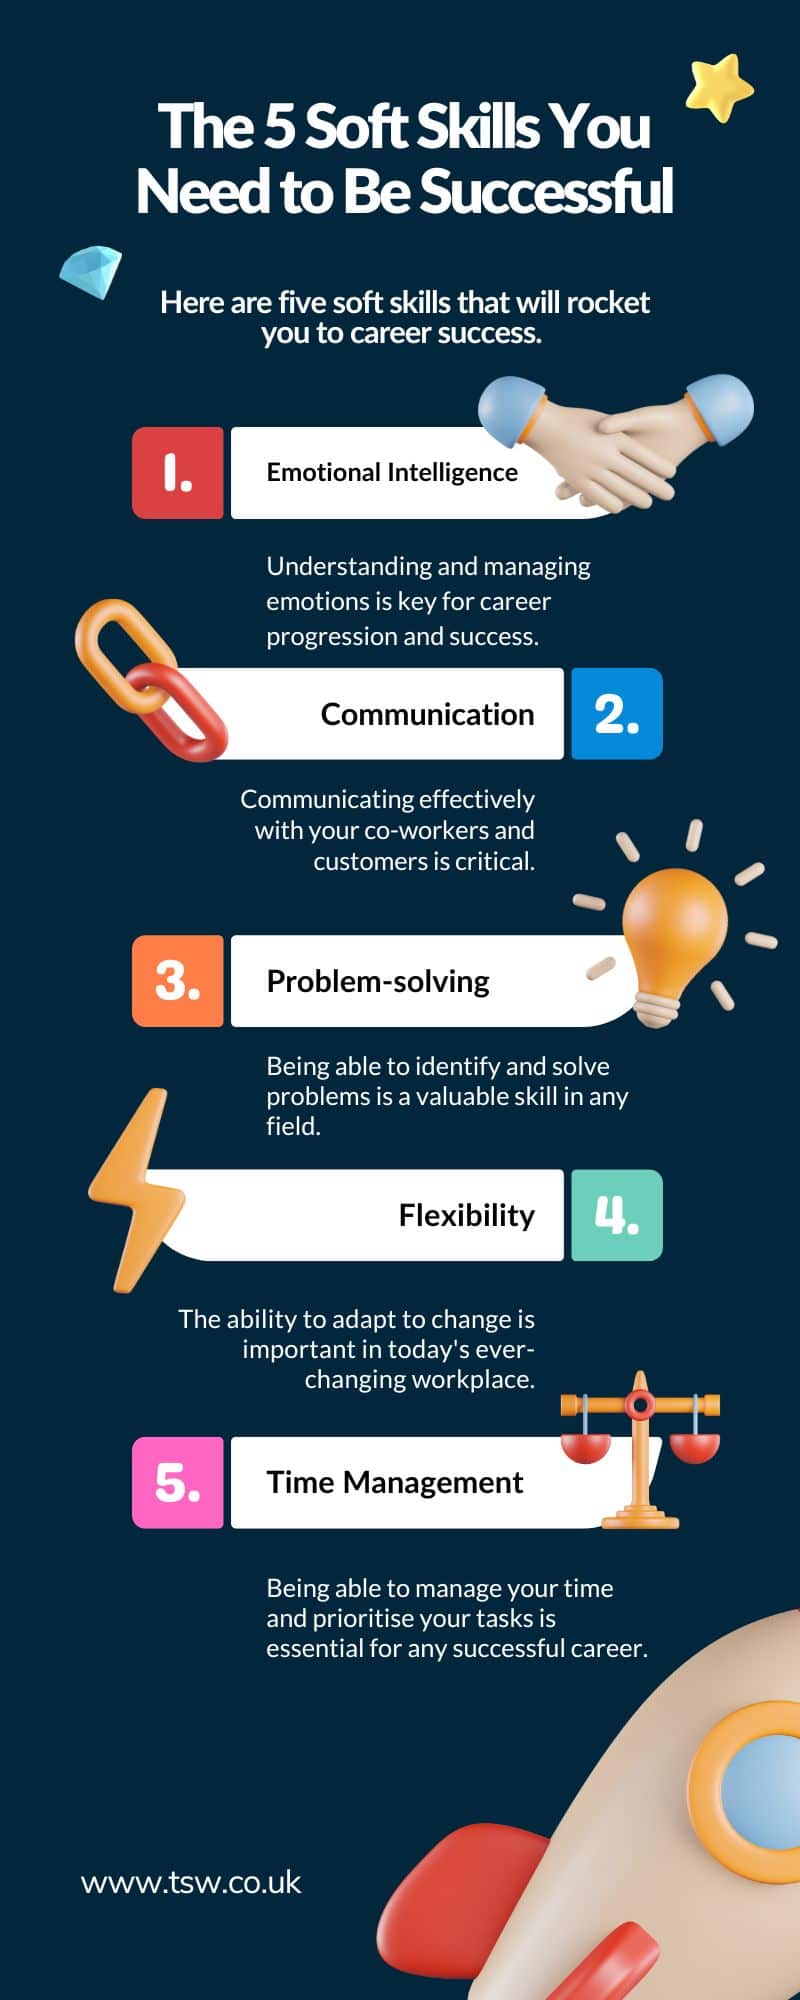 Infographic showing The 5 Soft Skills You Need to Be Successful